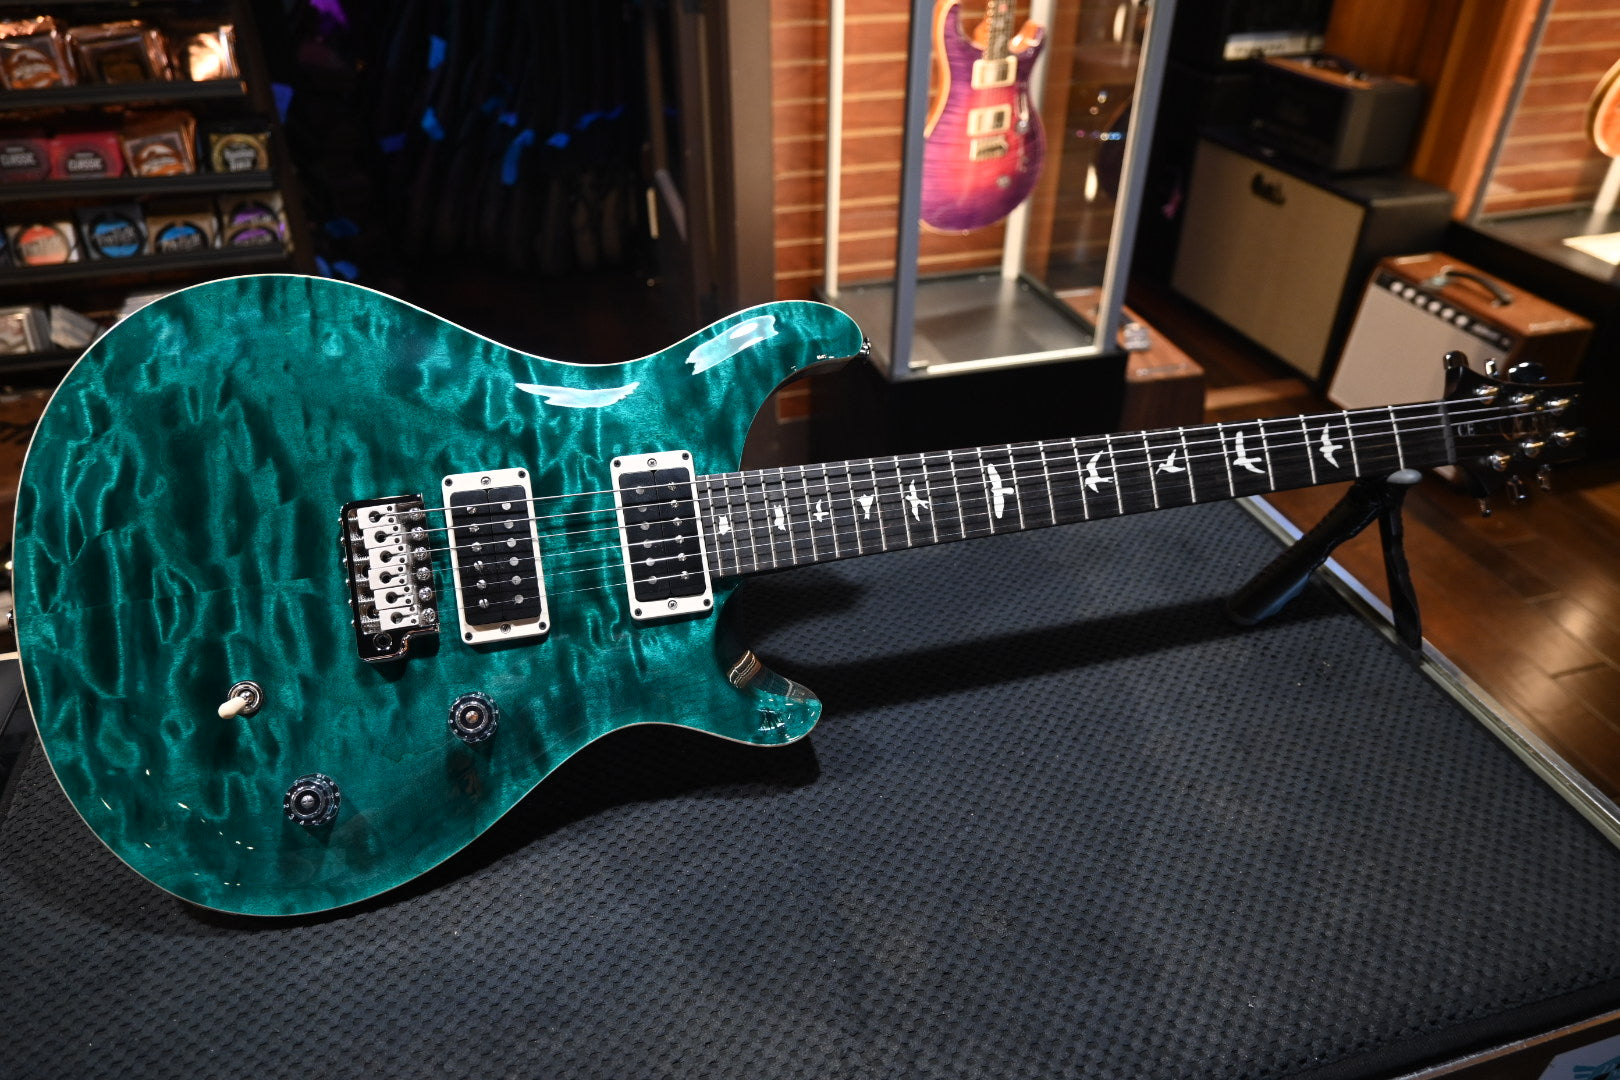 PRS Wood Library CE 24 Quilt - Turquoise Guitar #3696 - Danville Music